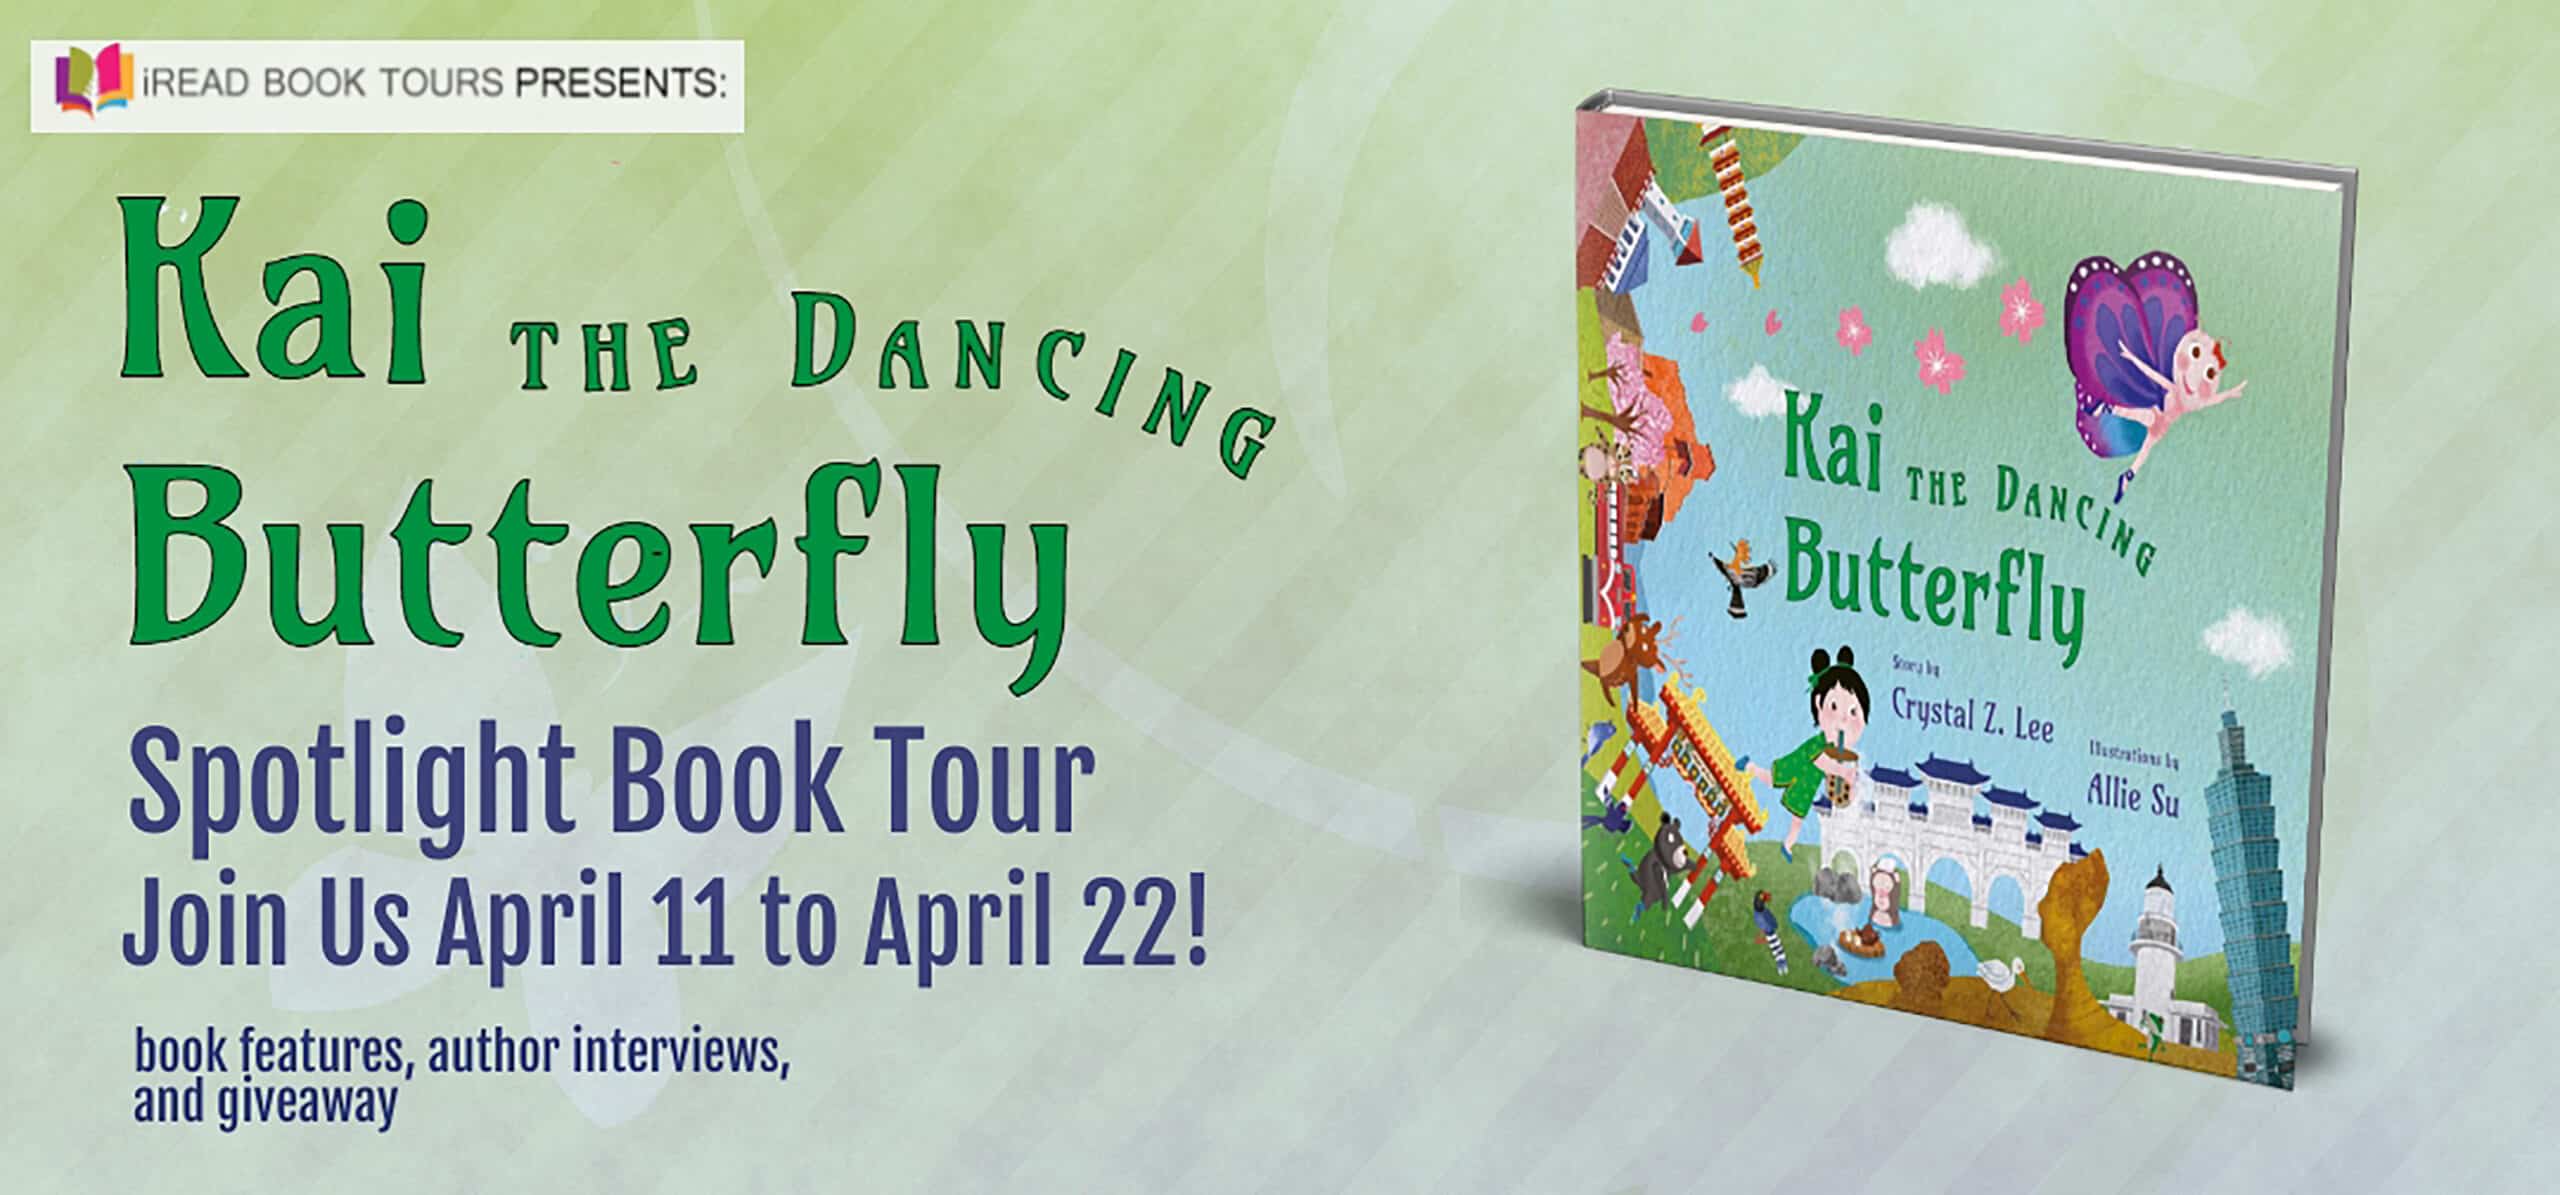 Kai the Dancing Butterfly by Crystal Z. Lee | Author Interview, Book Details, and 2 Giveaways